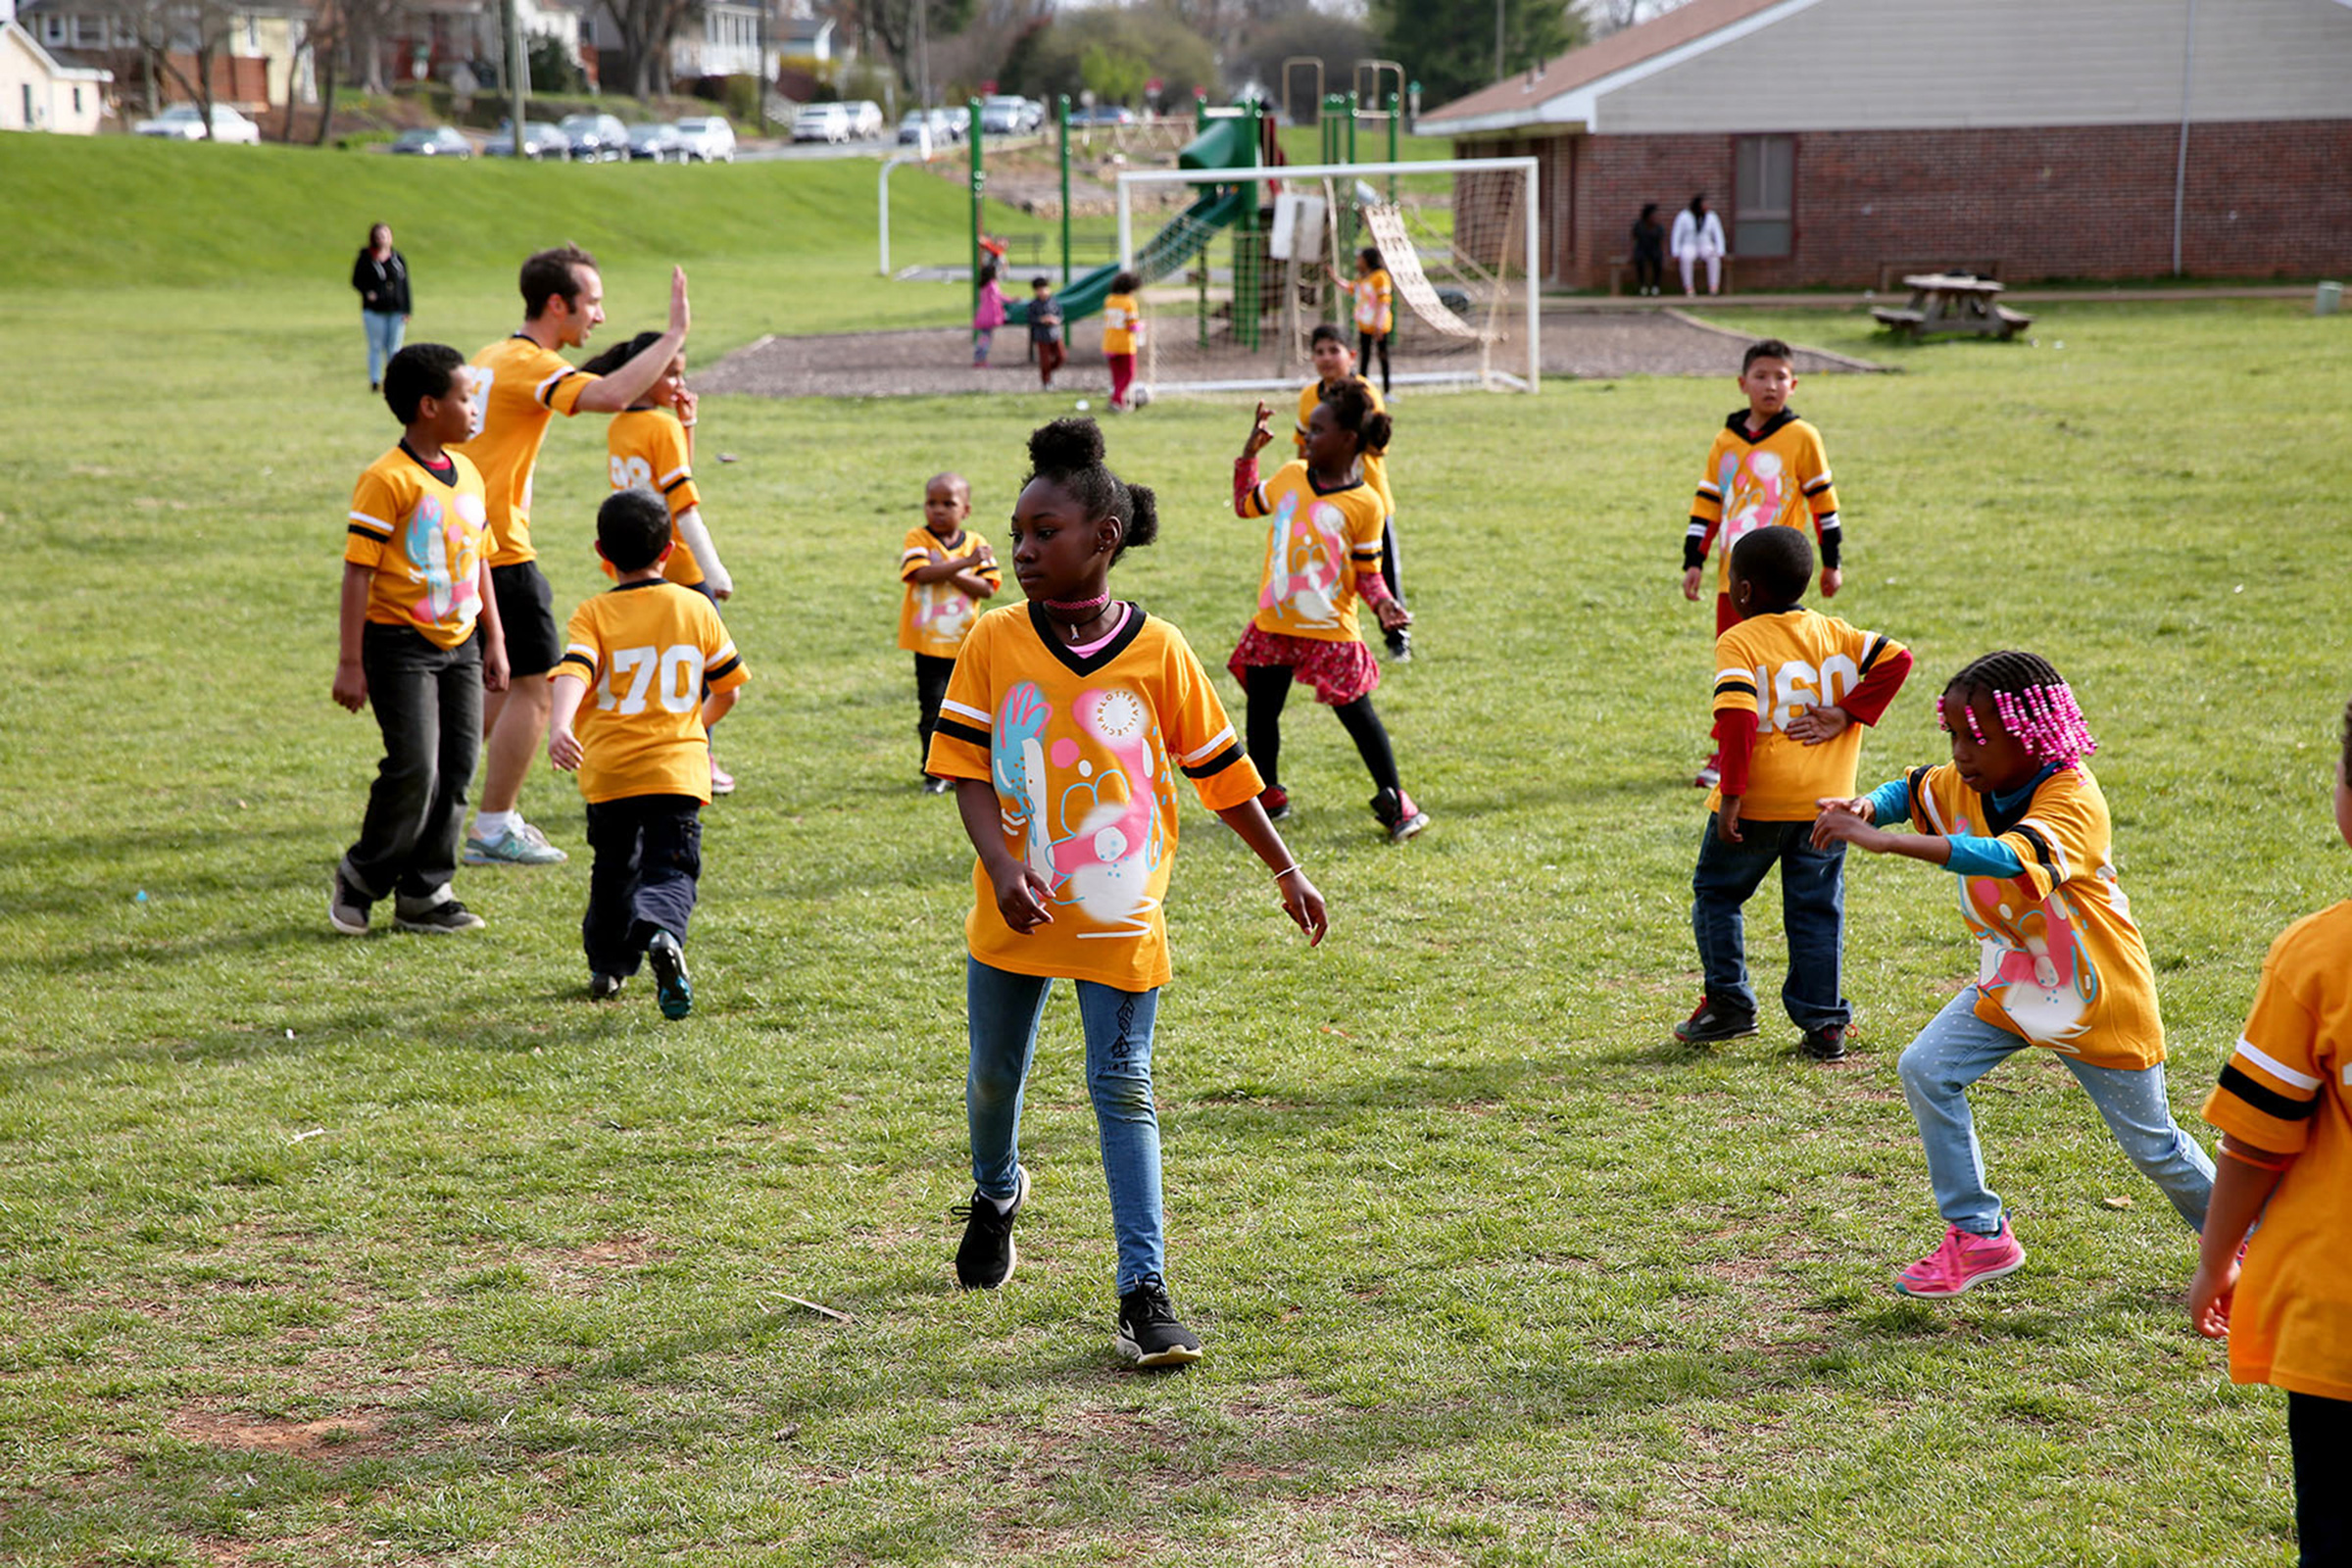 A dozen children and one adult wear matching yellow shirts while playing on a soccer field.